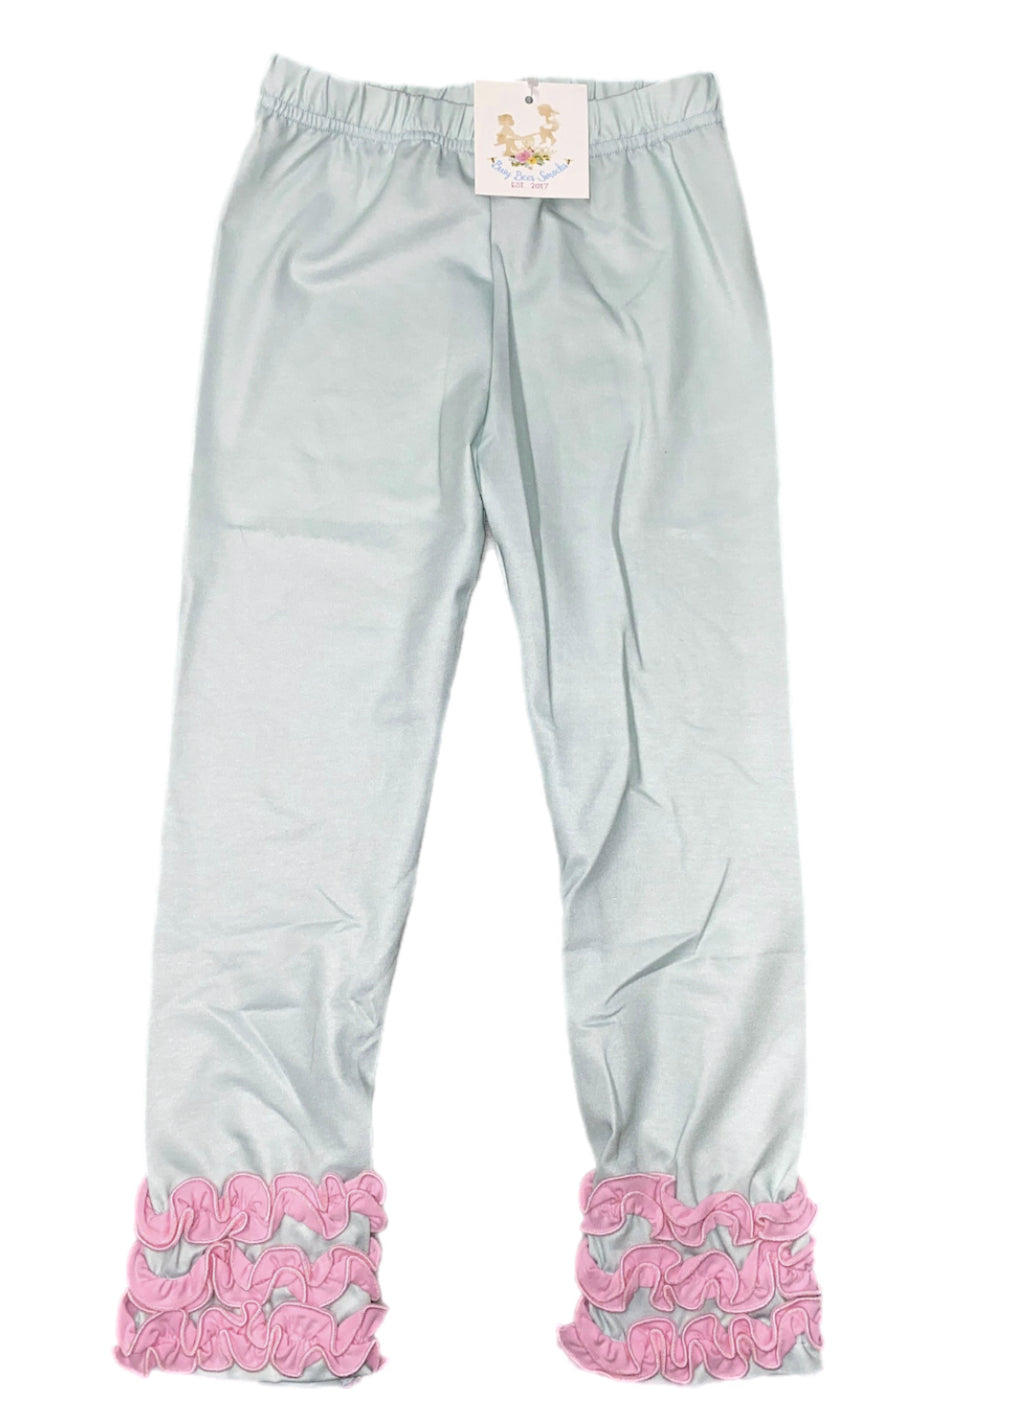 RTS: DEFECT-Girls Icy Mint & Pink Leggings